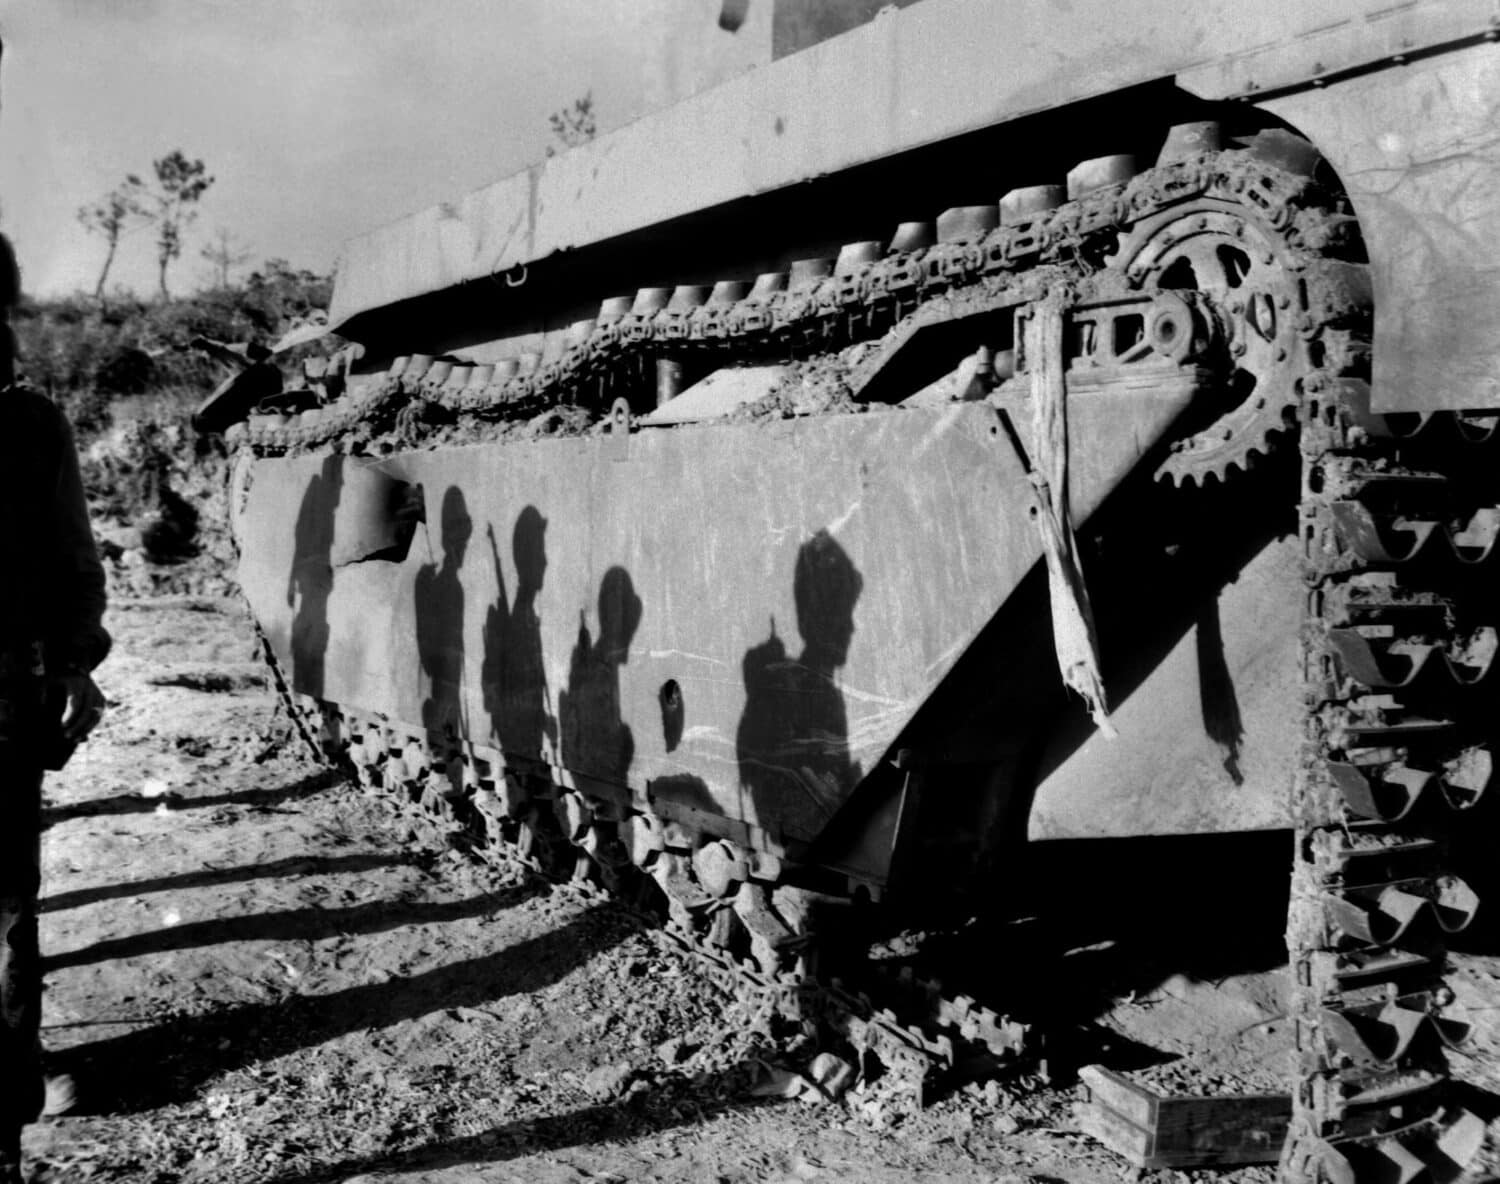 Shadows of 6th Division Marines on a battle-wrecked tank on Okinawa. The soldiers are advancing to mop up operations in the southern tip of the island. Late May to early June 1945.